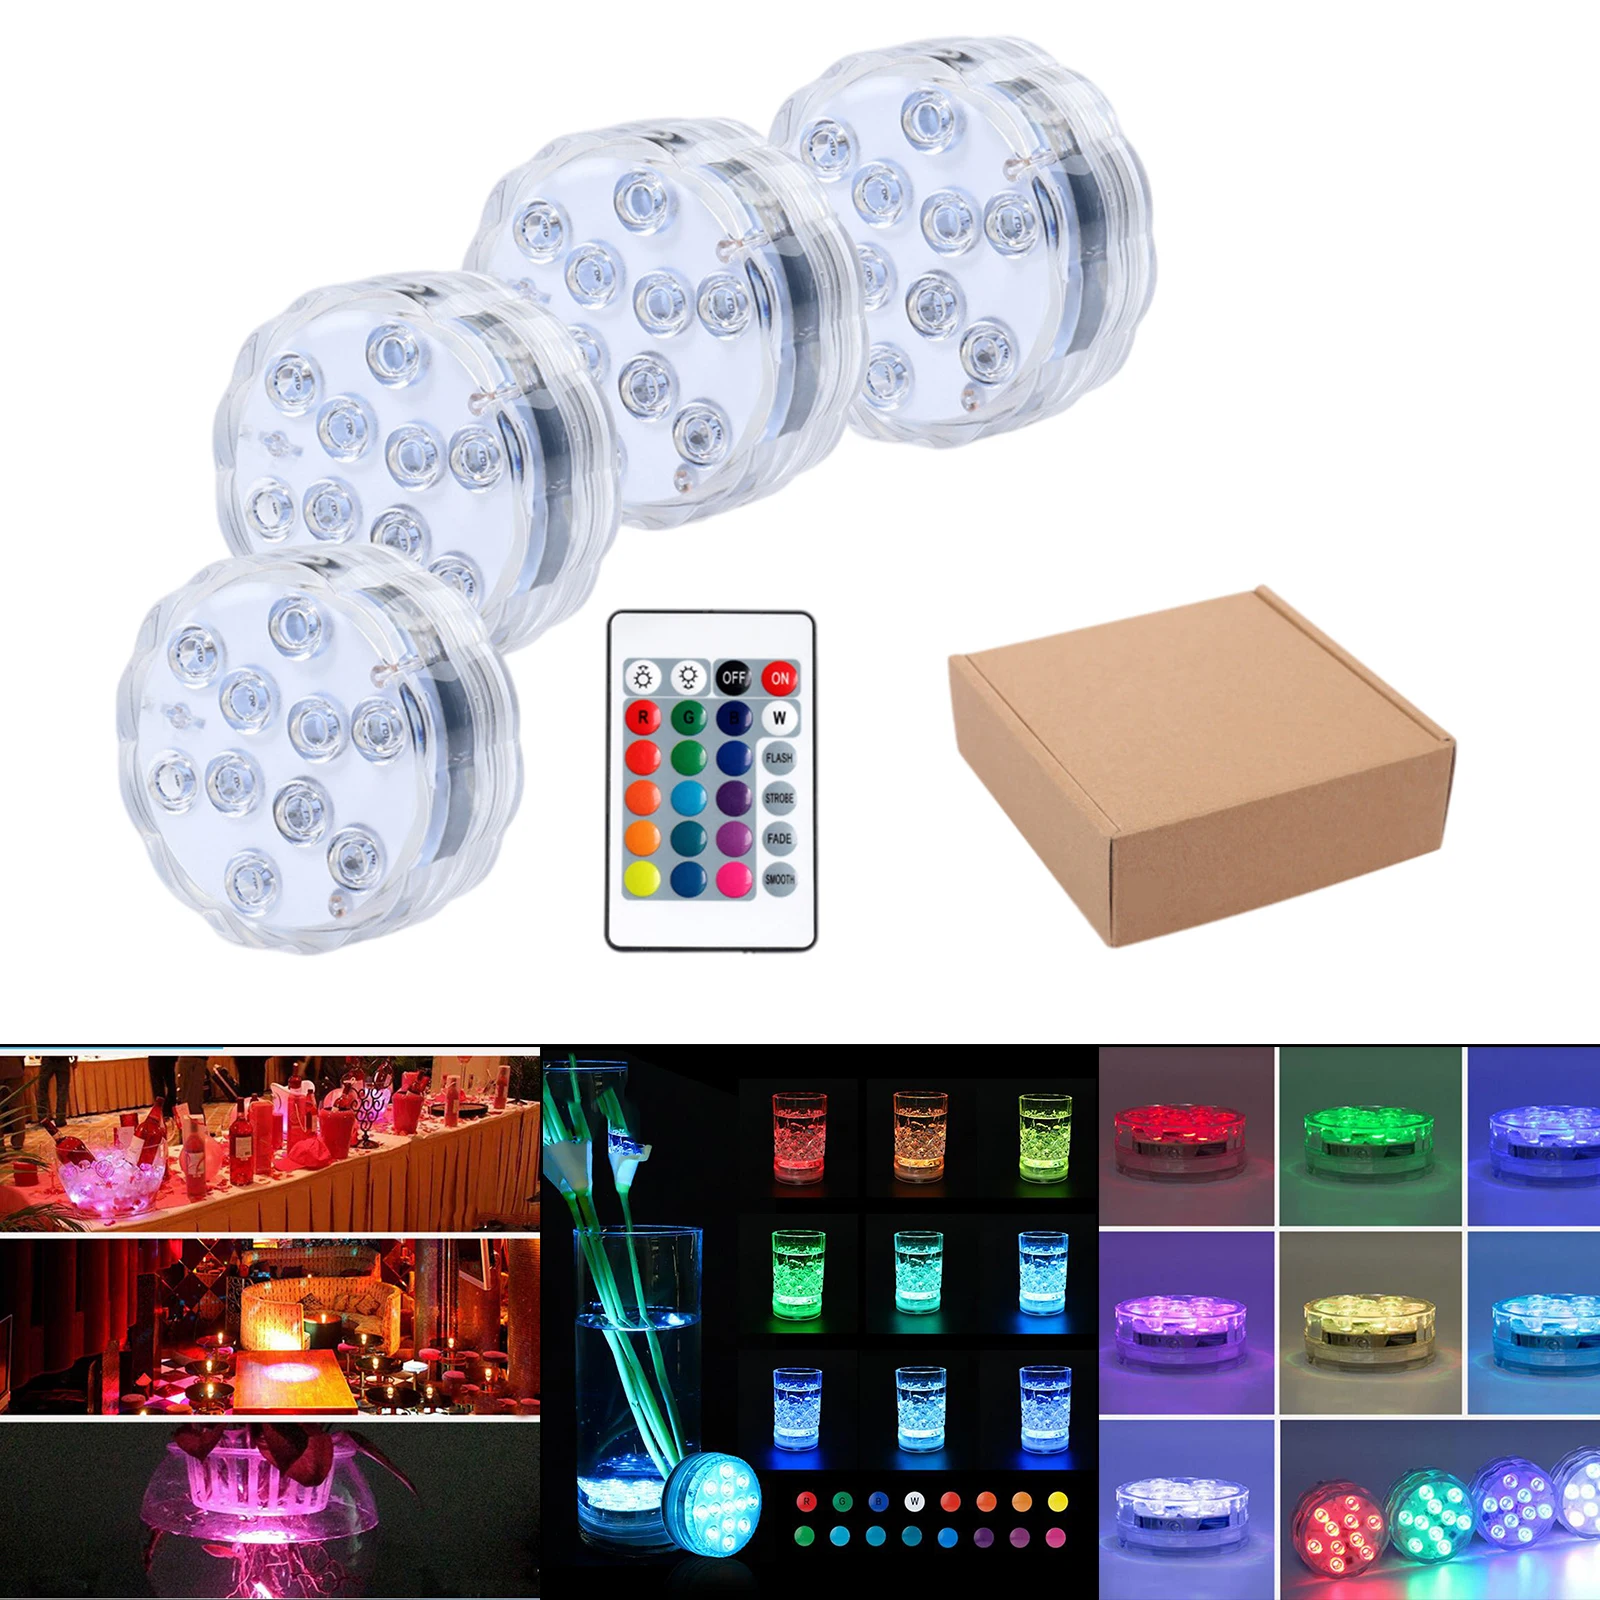 10-LEDs RGB Submersible LED Lights Pools Pond 7color Lights with Suction Cup